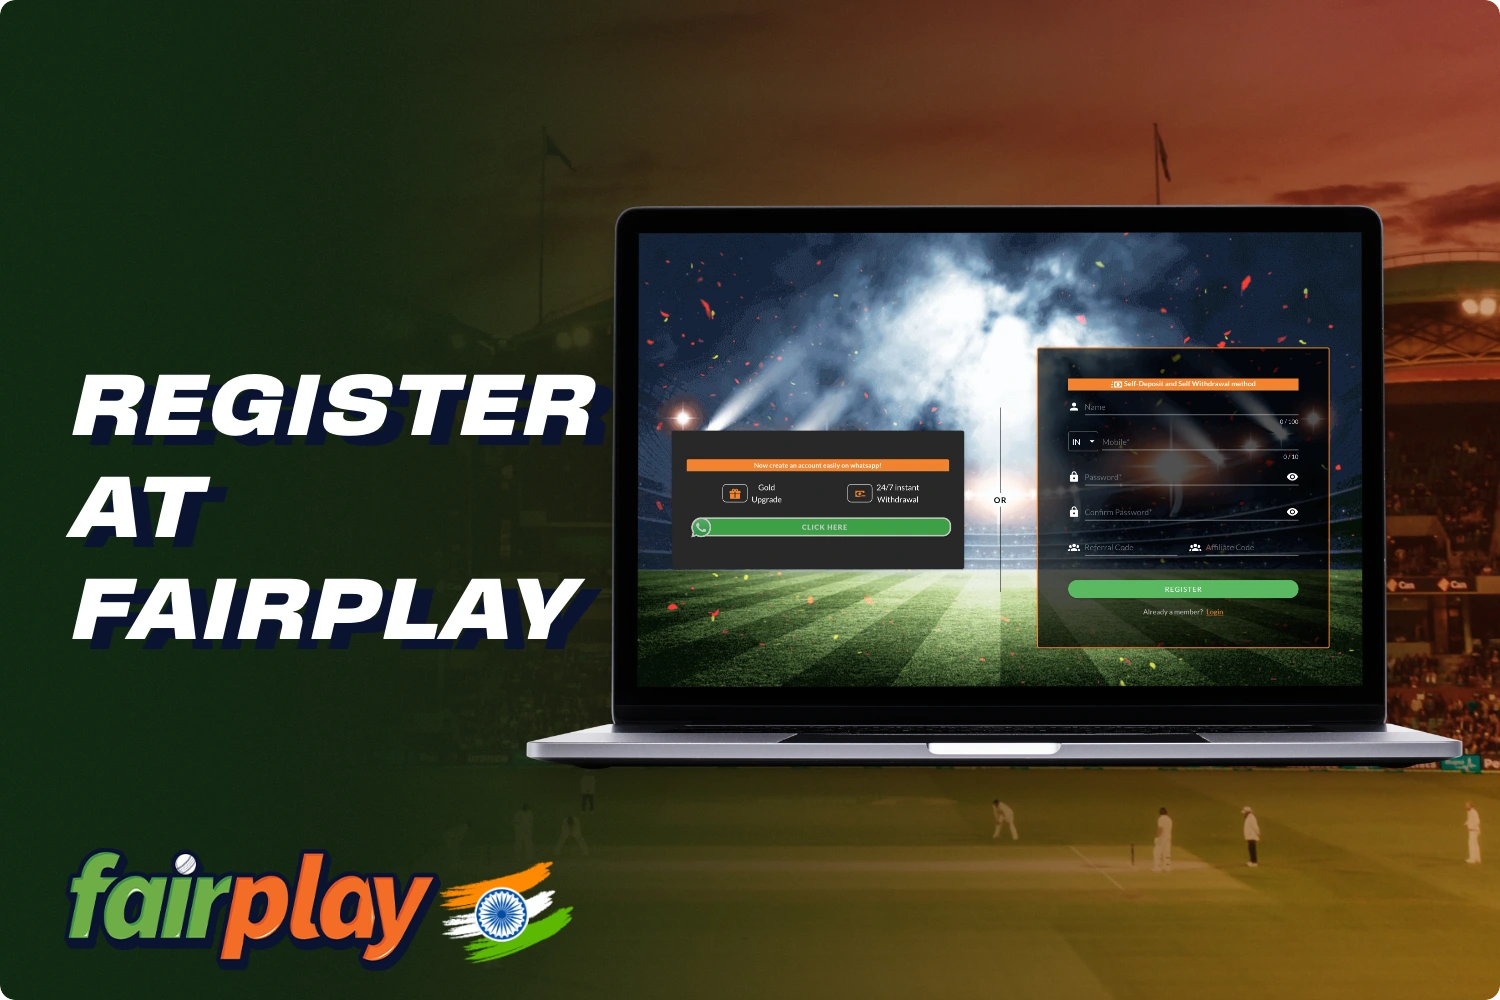 Registration at Fairplay gives you full access to all the features and functionality of the platform